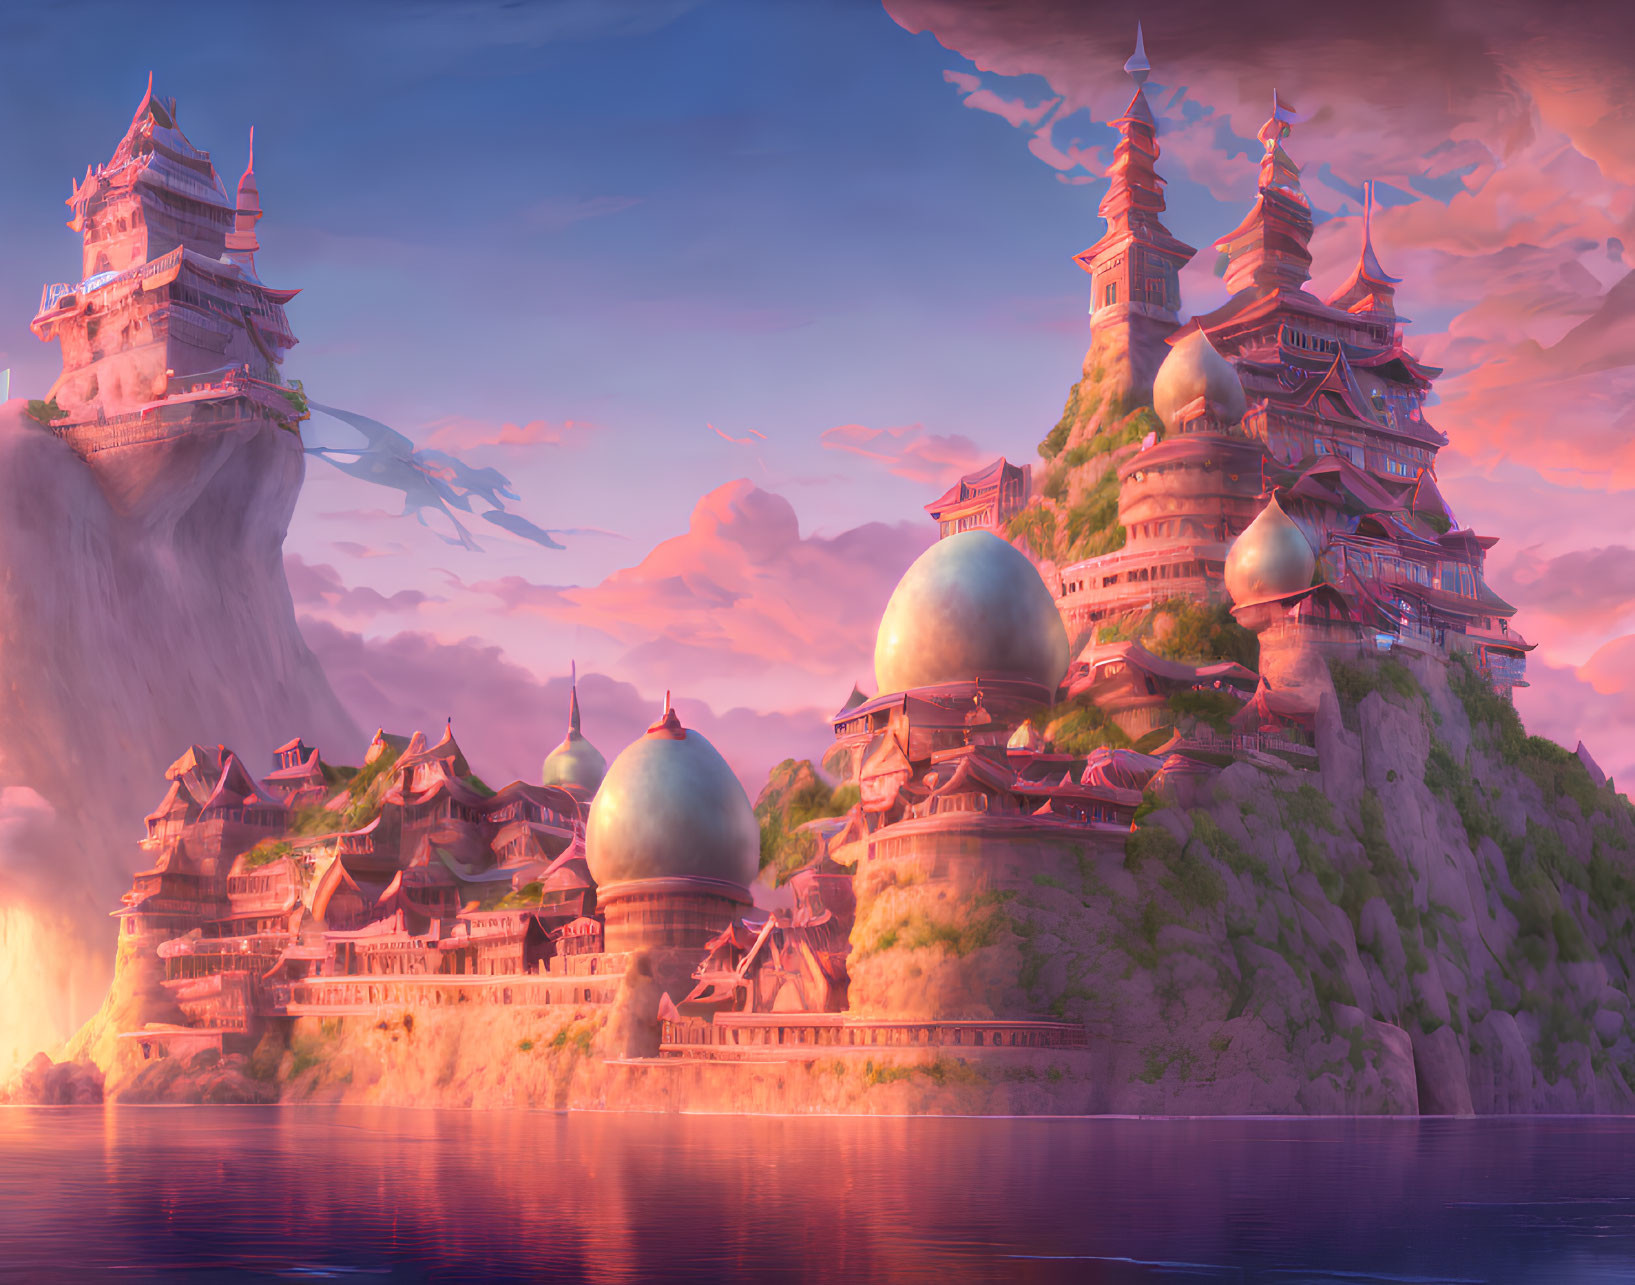 Asian-inspired cliffside village at sunset with ornate buildings, waterfalls, and floating orbs